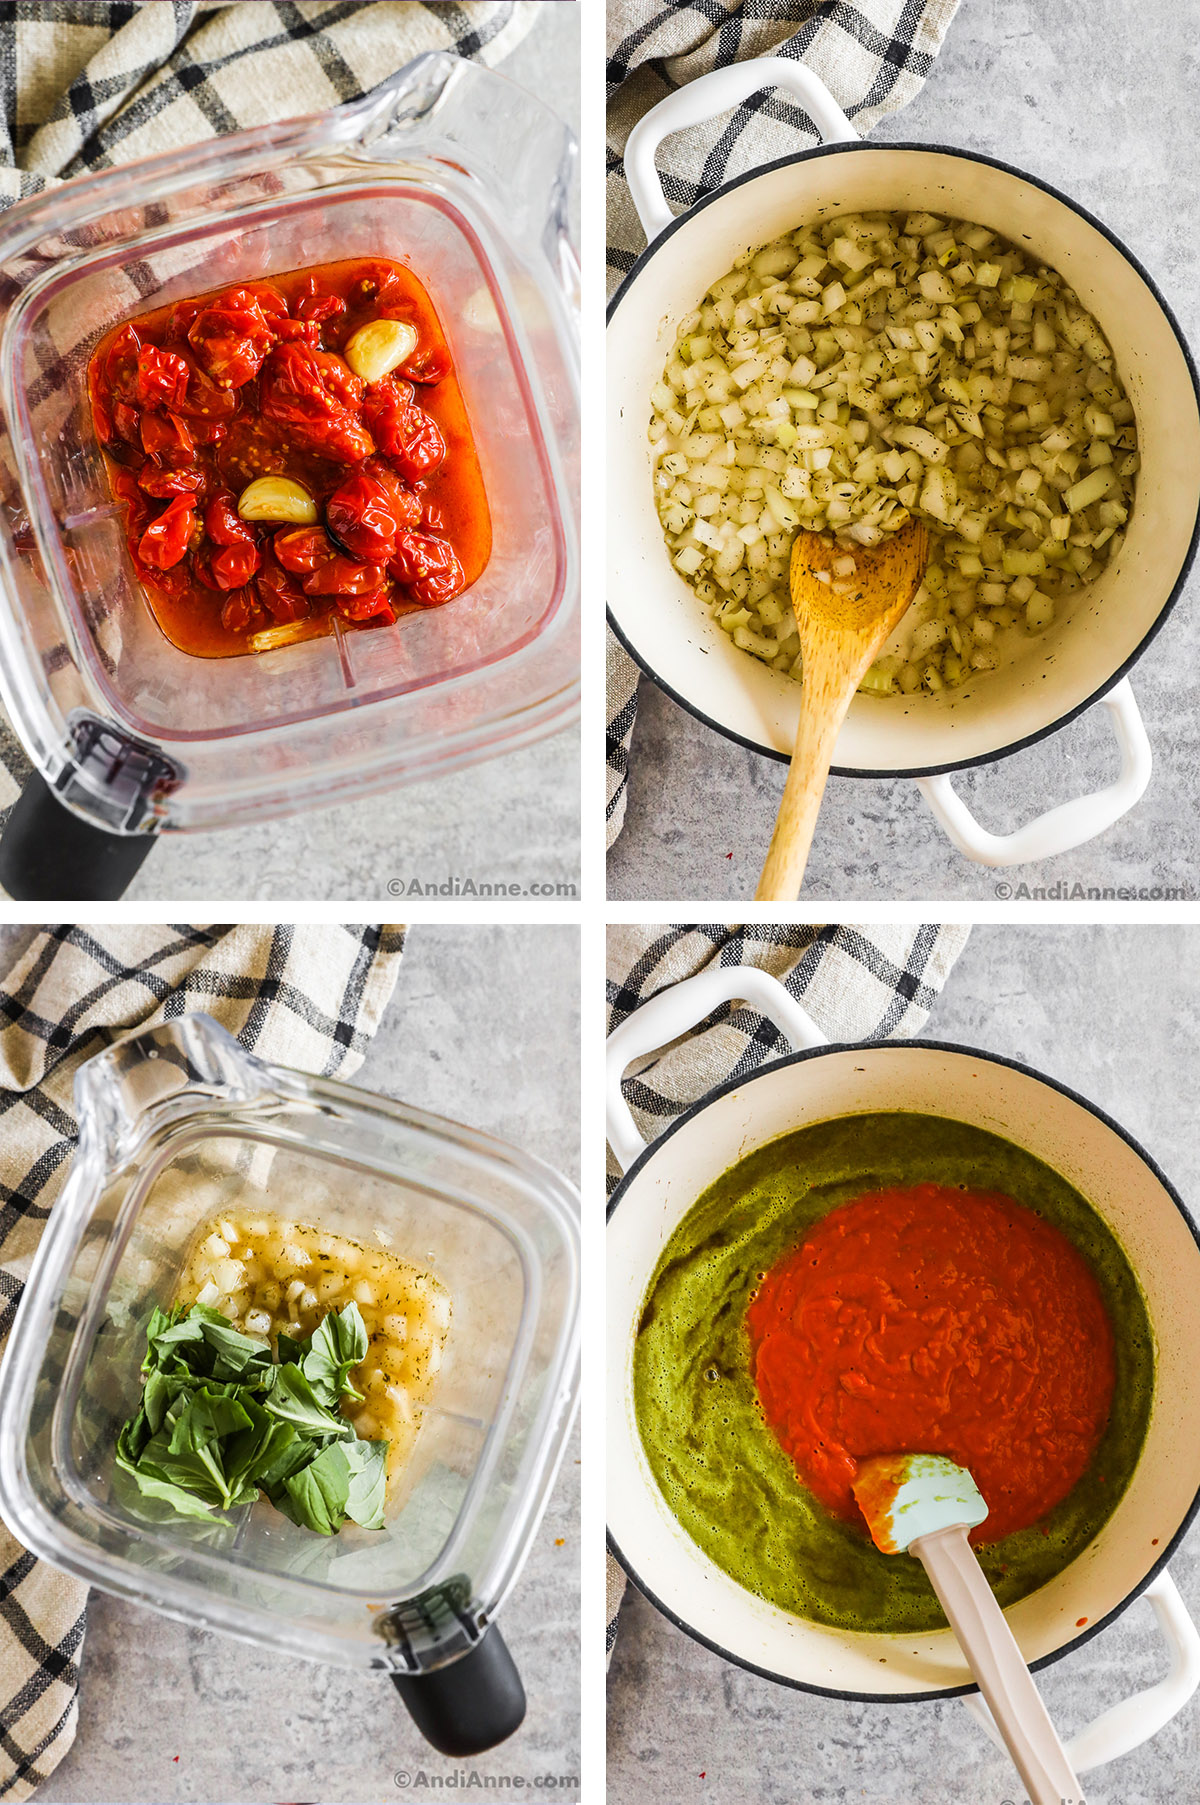 Four images showing steps to make recipe. First is roasted tomatoes and garlic in a blender, second is chopped sauteed onion in a pot, third is sauteed onion and fresh basil in a blender, fourth is pureed green and red soup ingredients in a pot with a spatula.